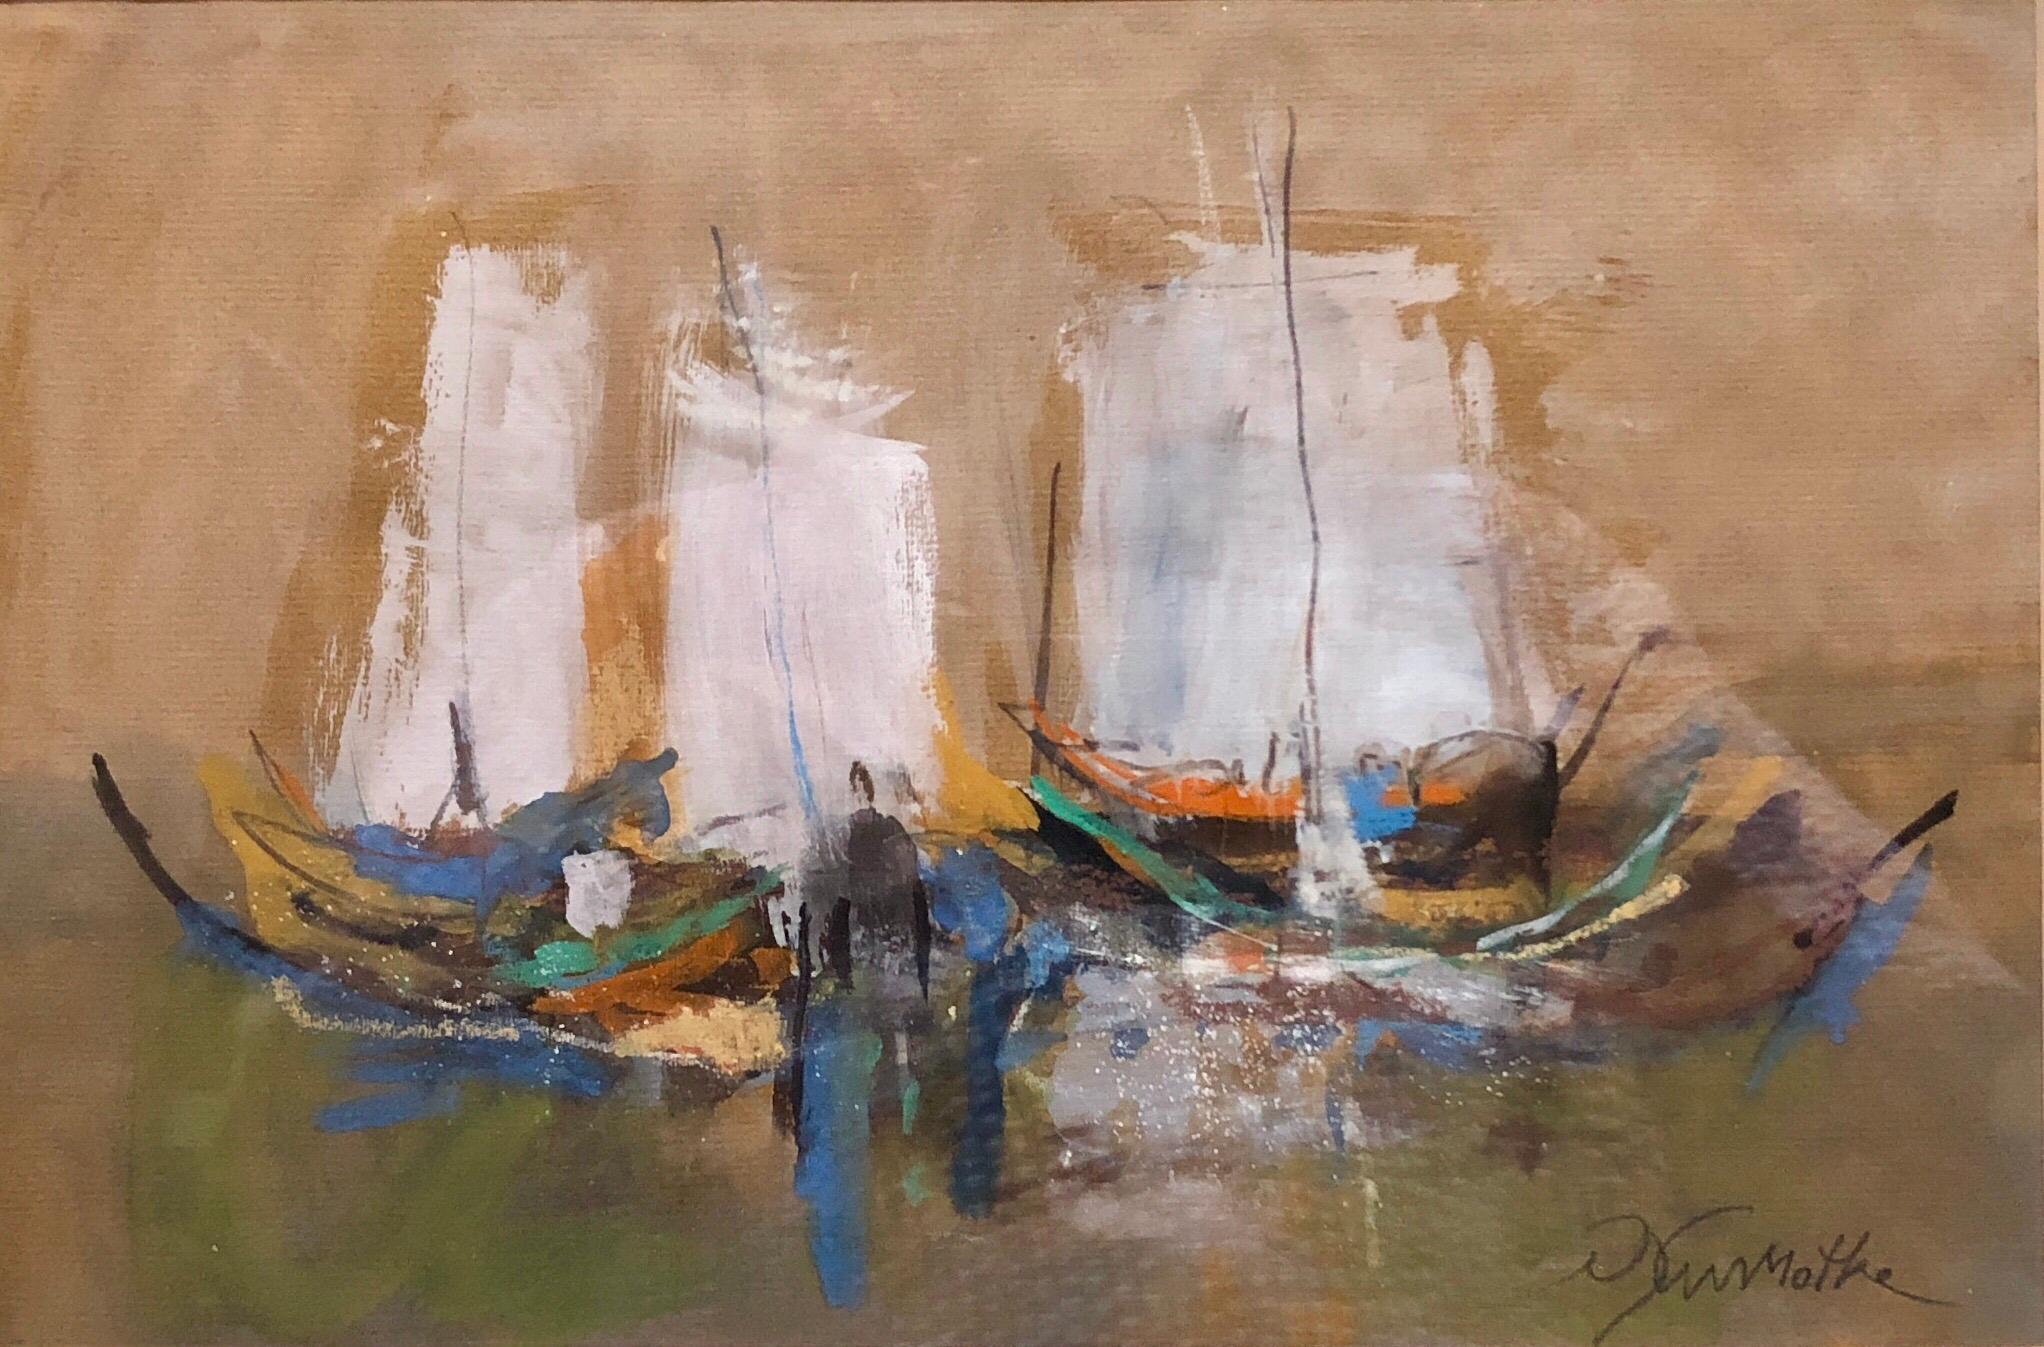 Motke Blum Landscape Painting - Israeli Modernist Abstract Expressionist Gouache Painting Boats